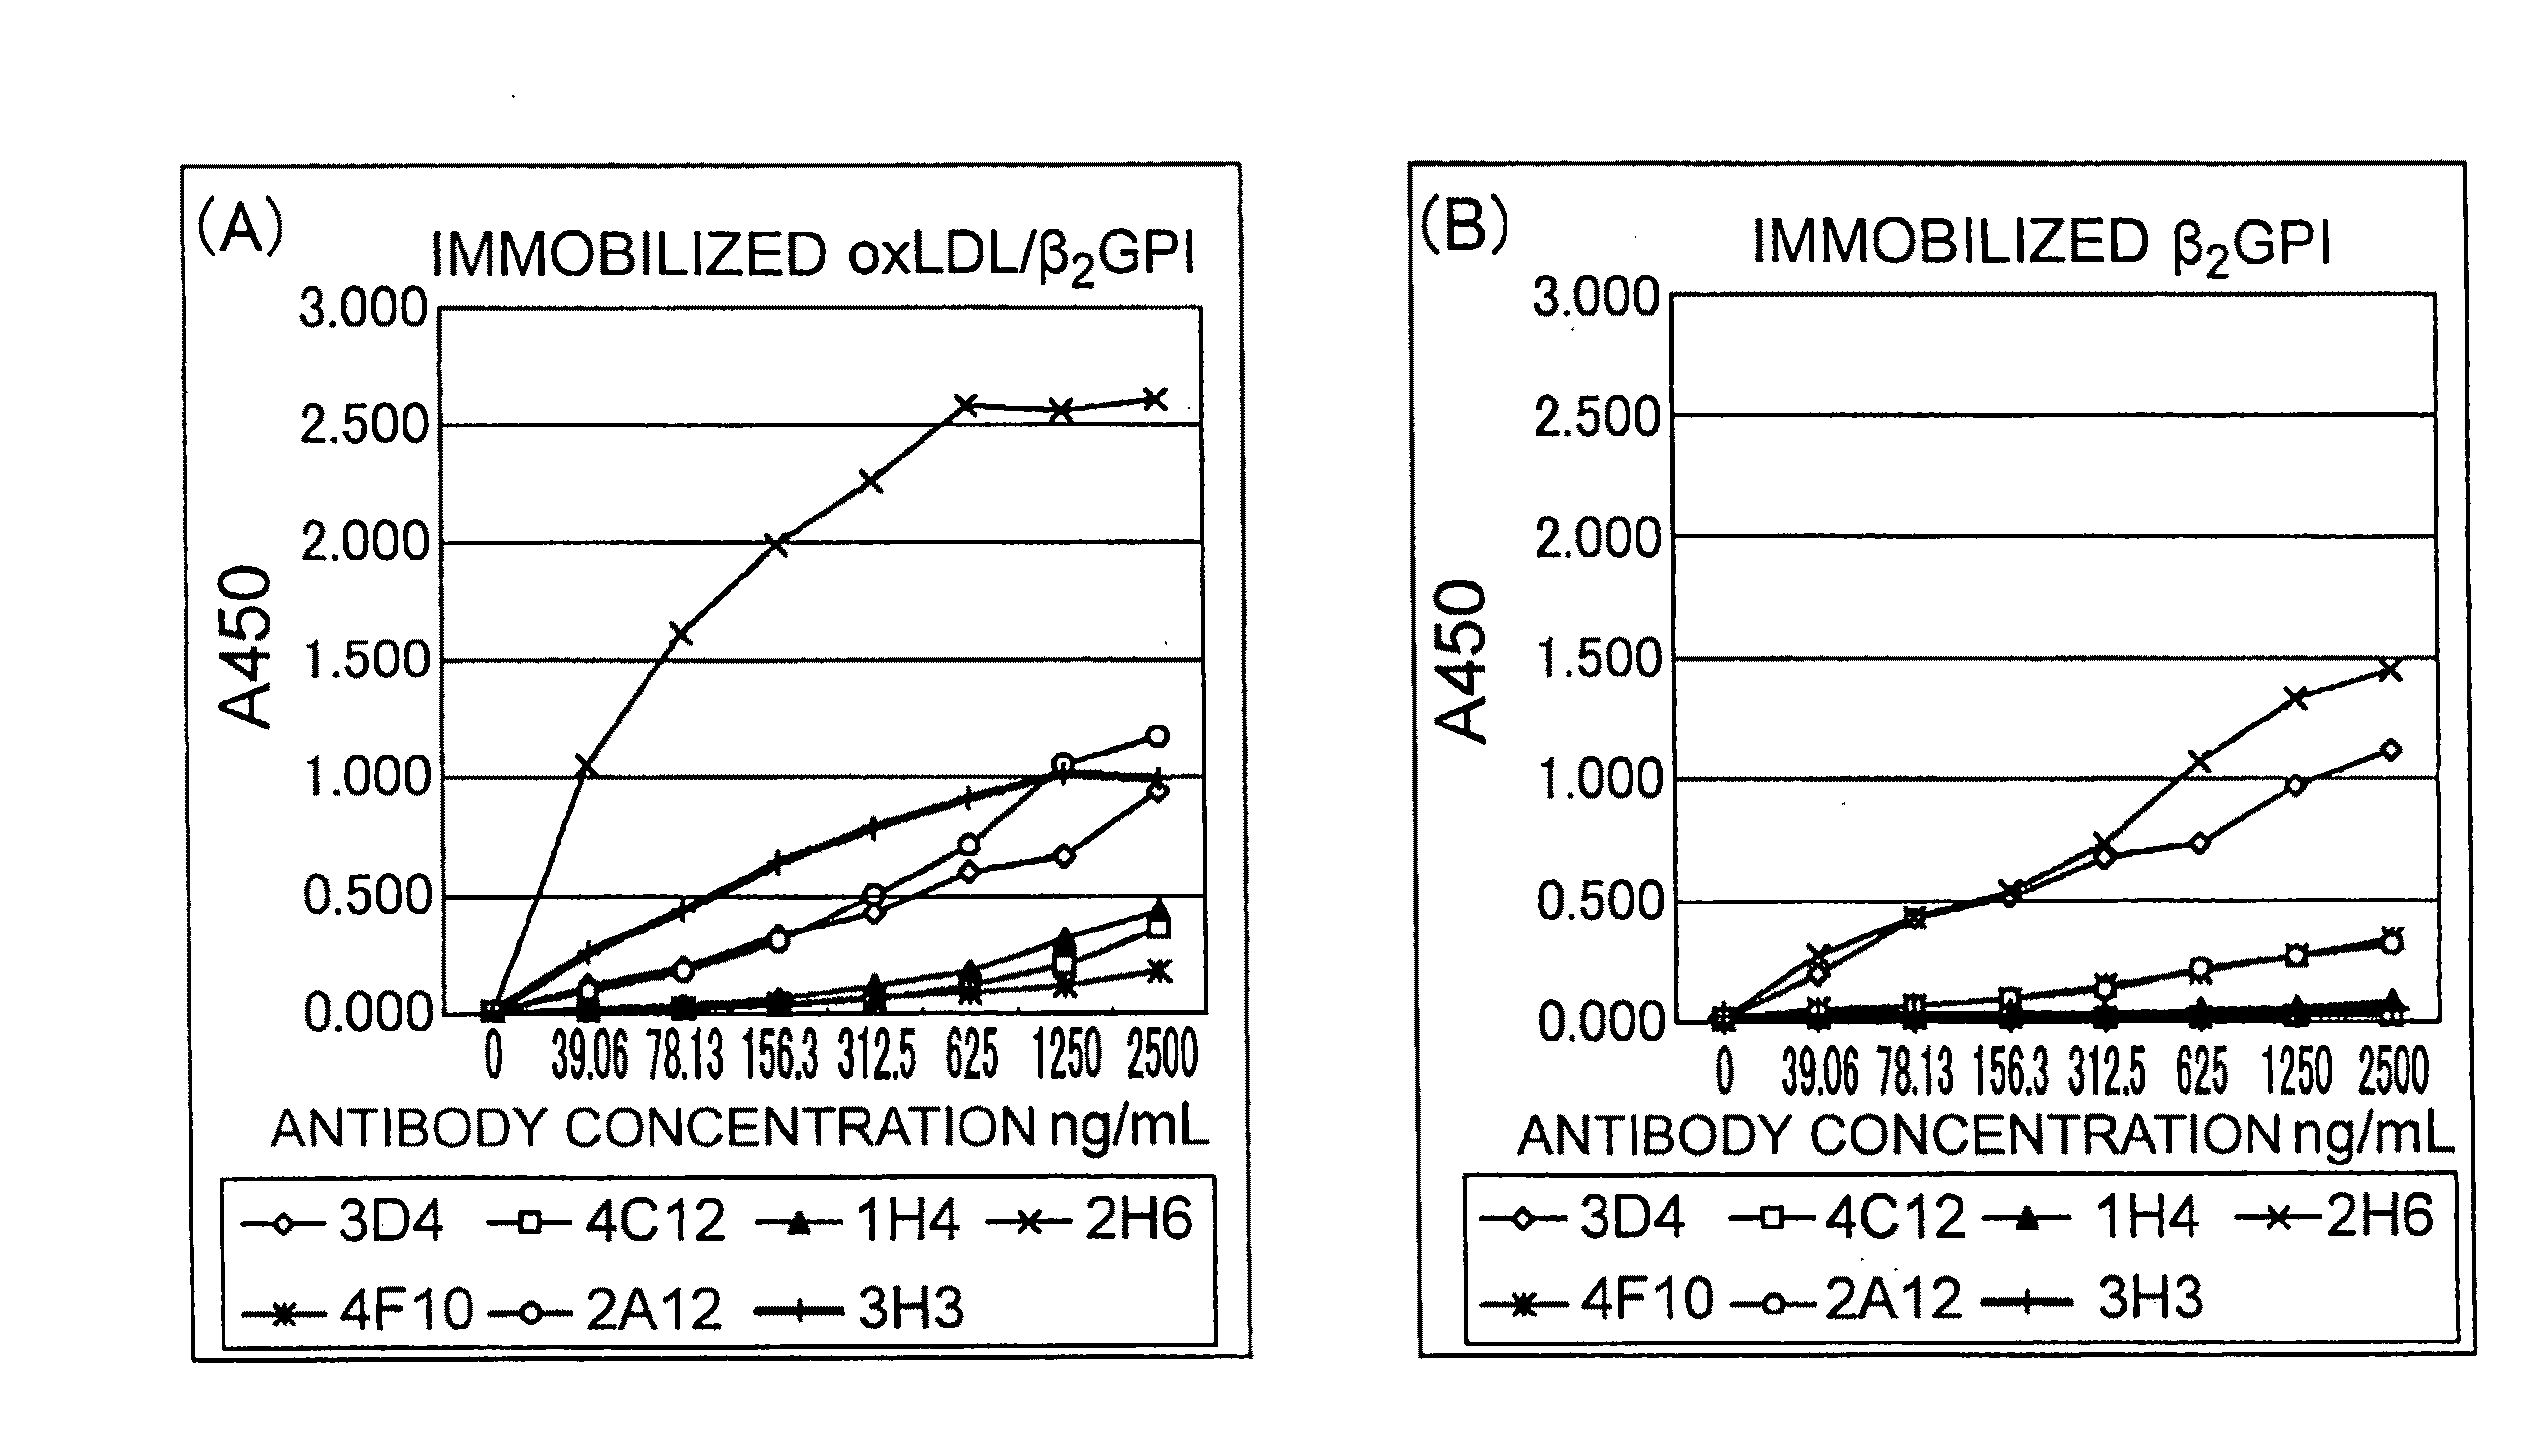 Antibody against oxidized ldl/ß2gpi complex and use of the same